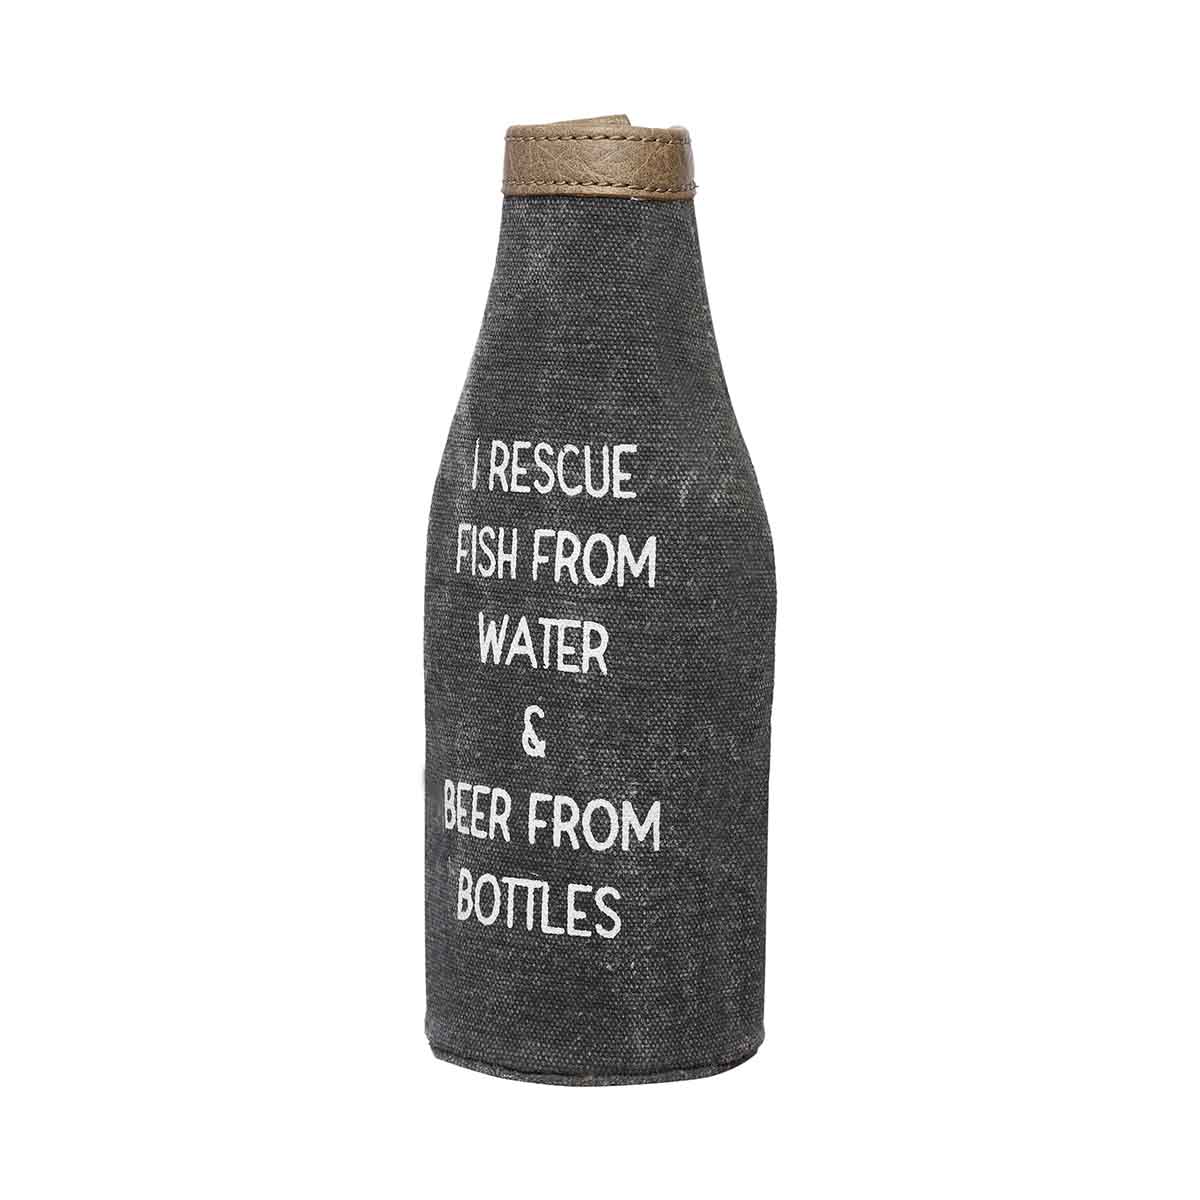 Mona B Pint Beer Bottle Covers with Stylish Printing for Men and Women (Rescued)